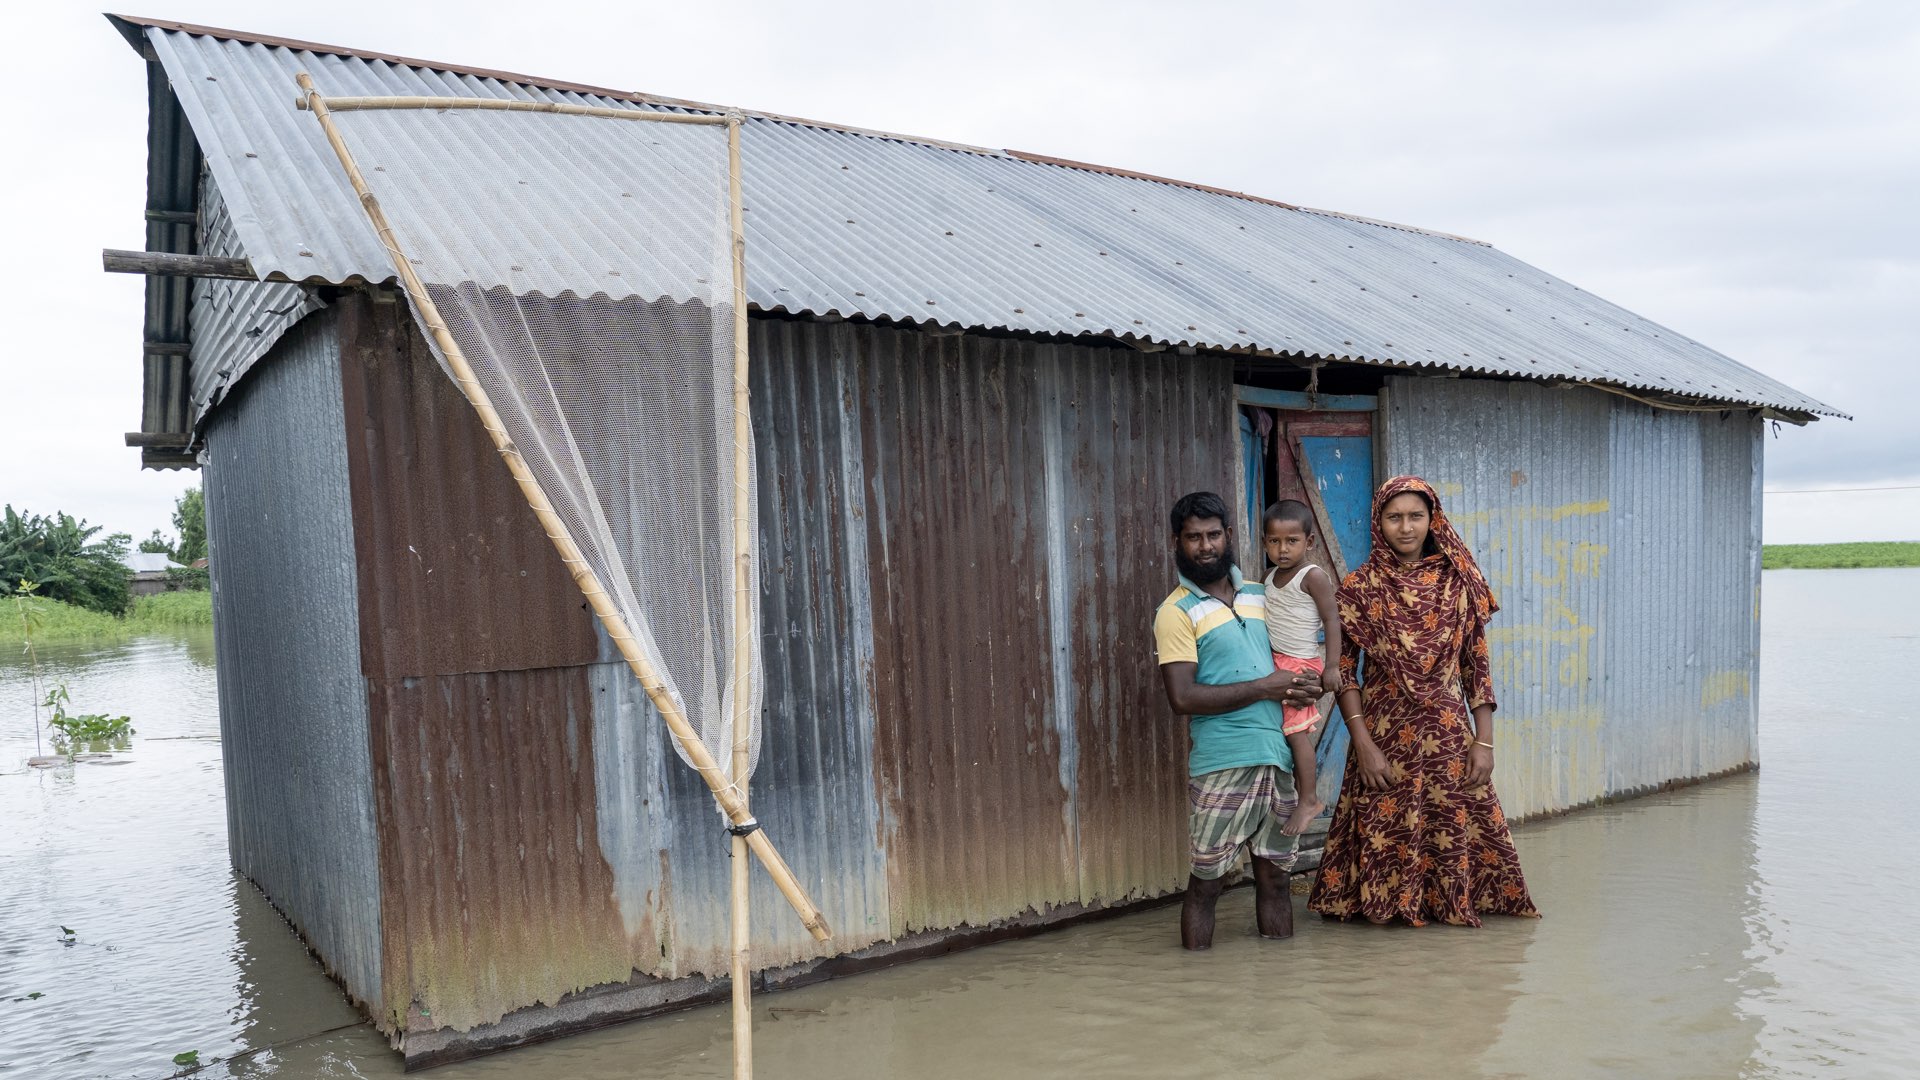 Family of three in Bangladesh posing in front of their house amidst floods